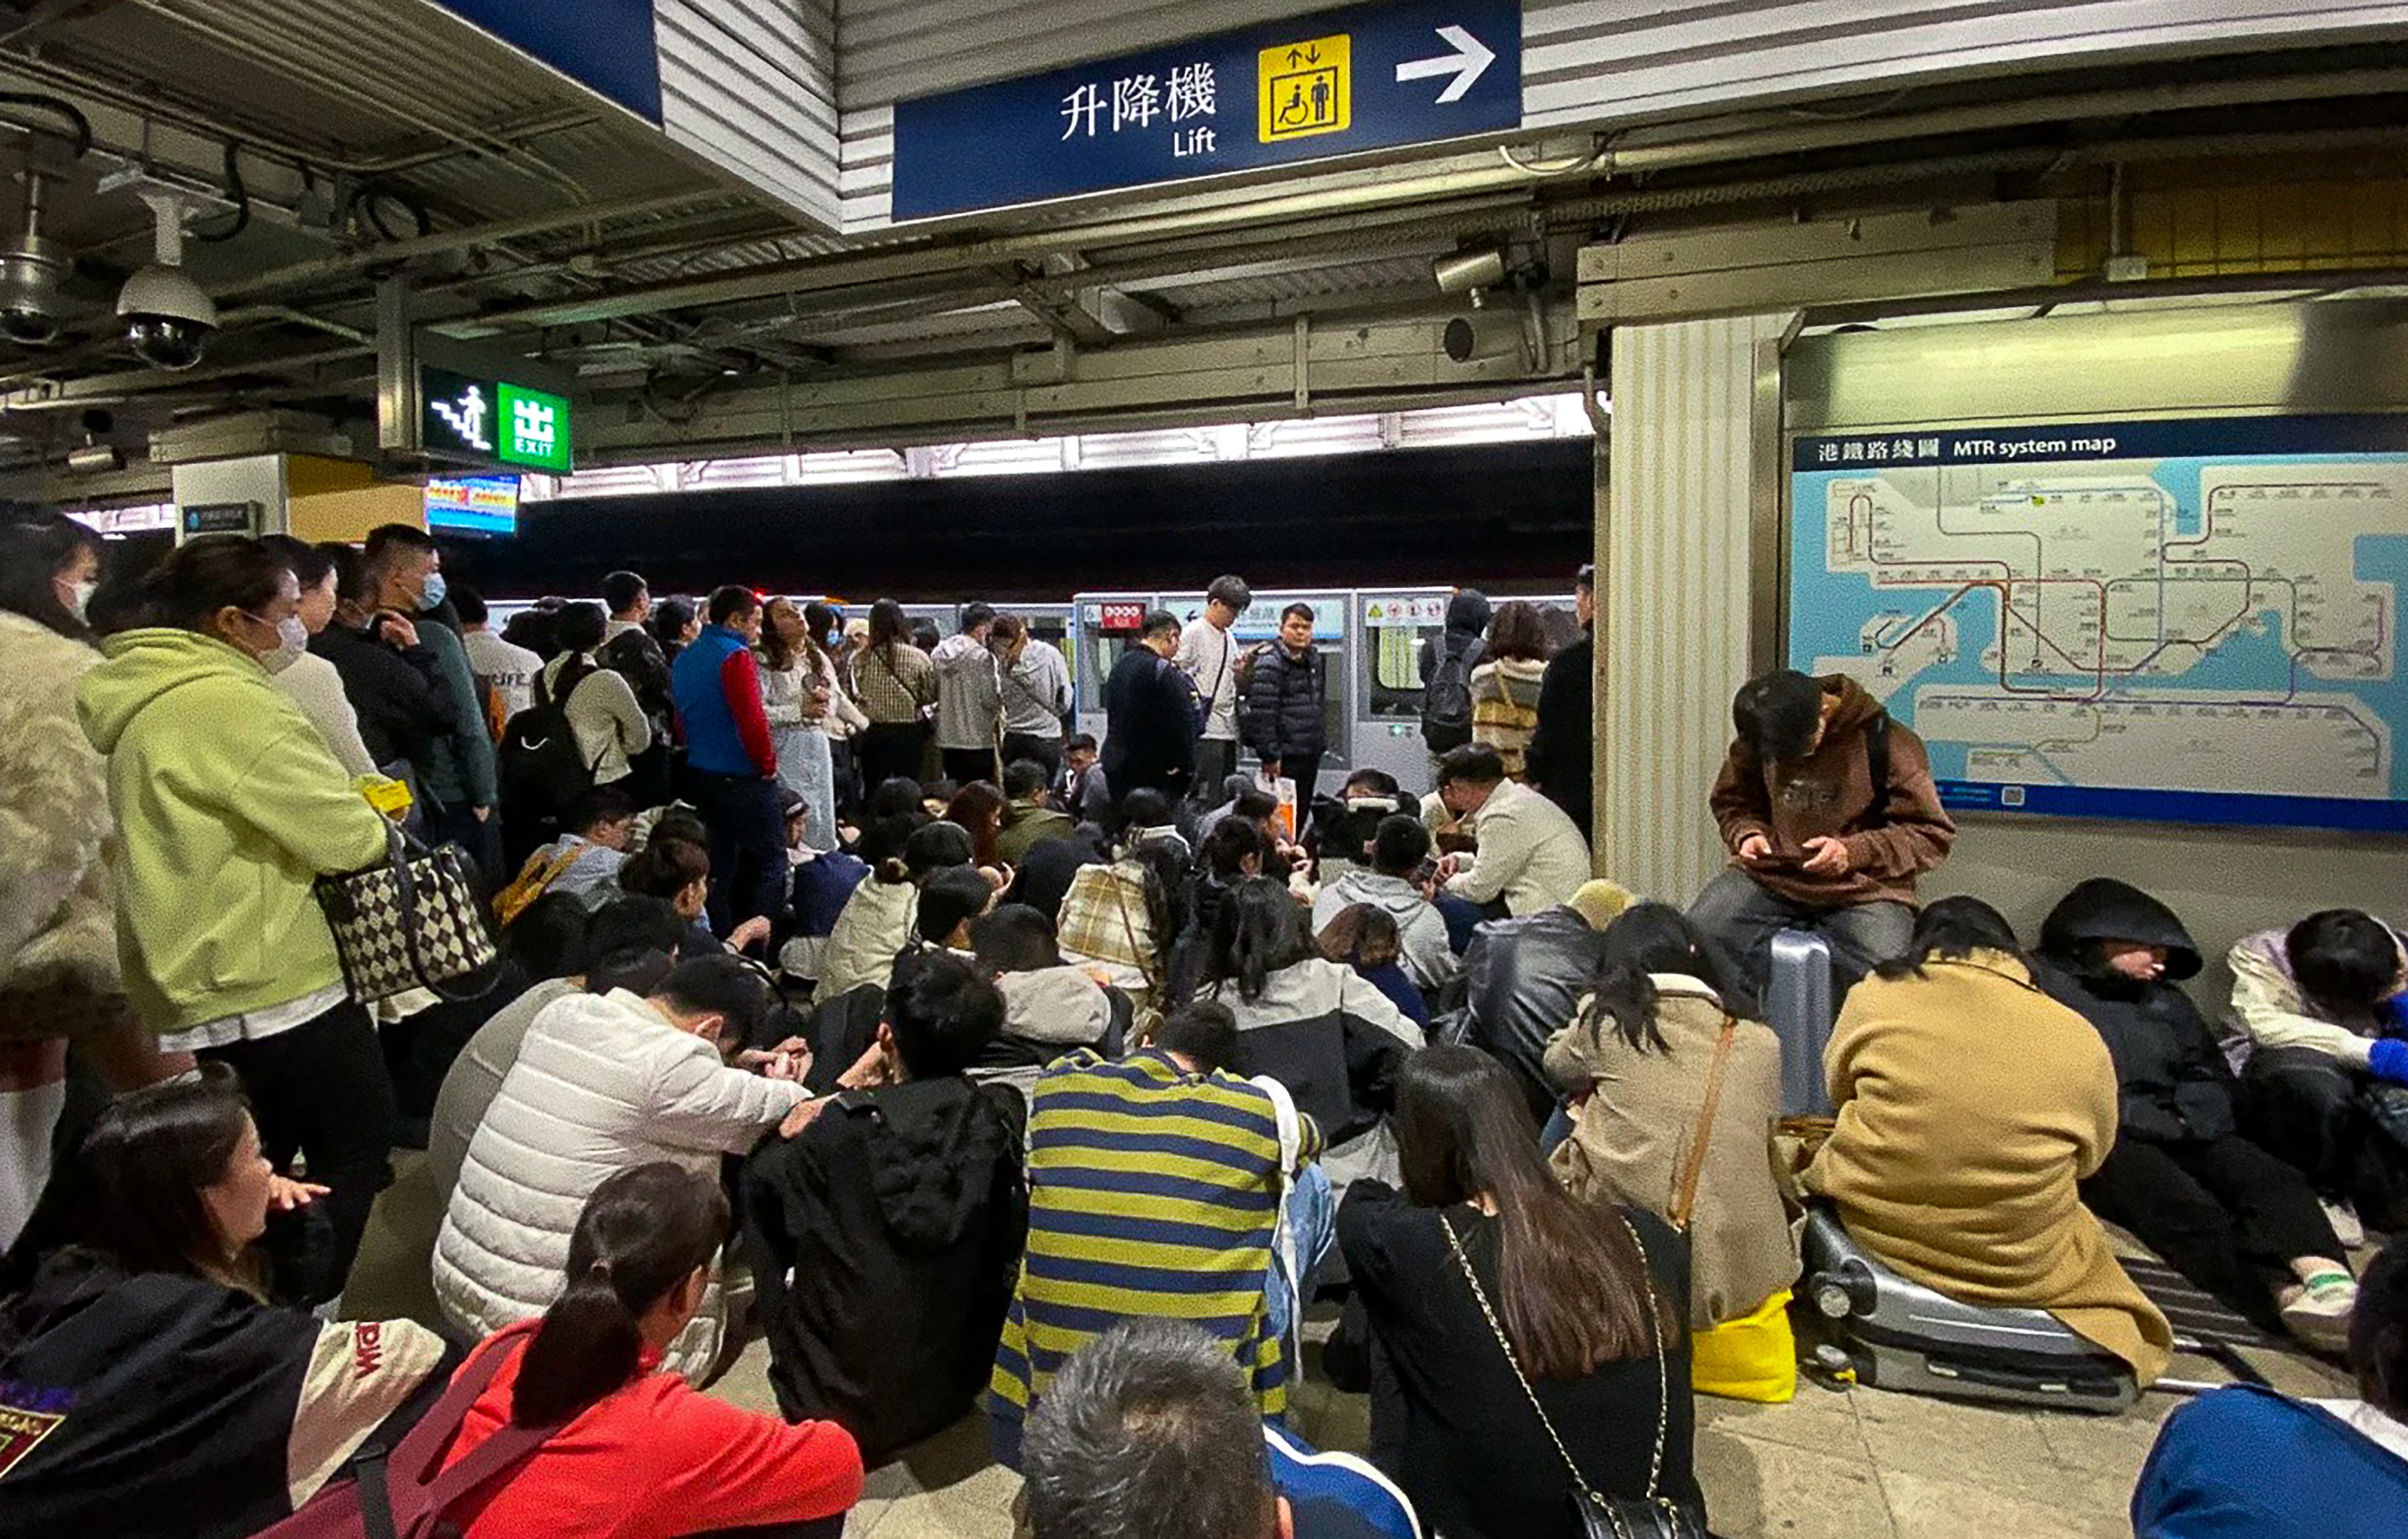 Mainland tourists wait at Sheung Shui MTR Station. Thousands were unable to return home after attending the city’s New Year’s Eve celebrations. Photo: Xiaohongshu/乐书叶